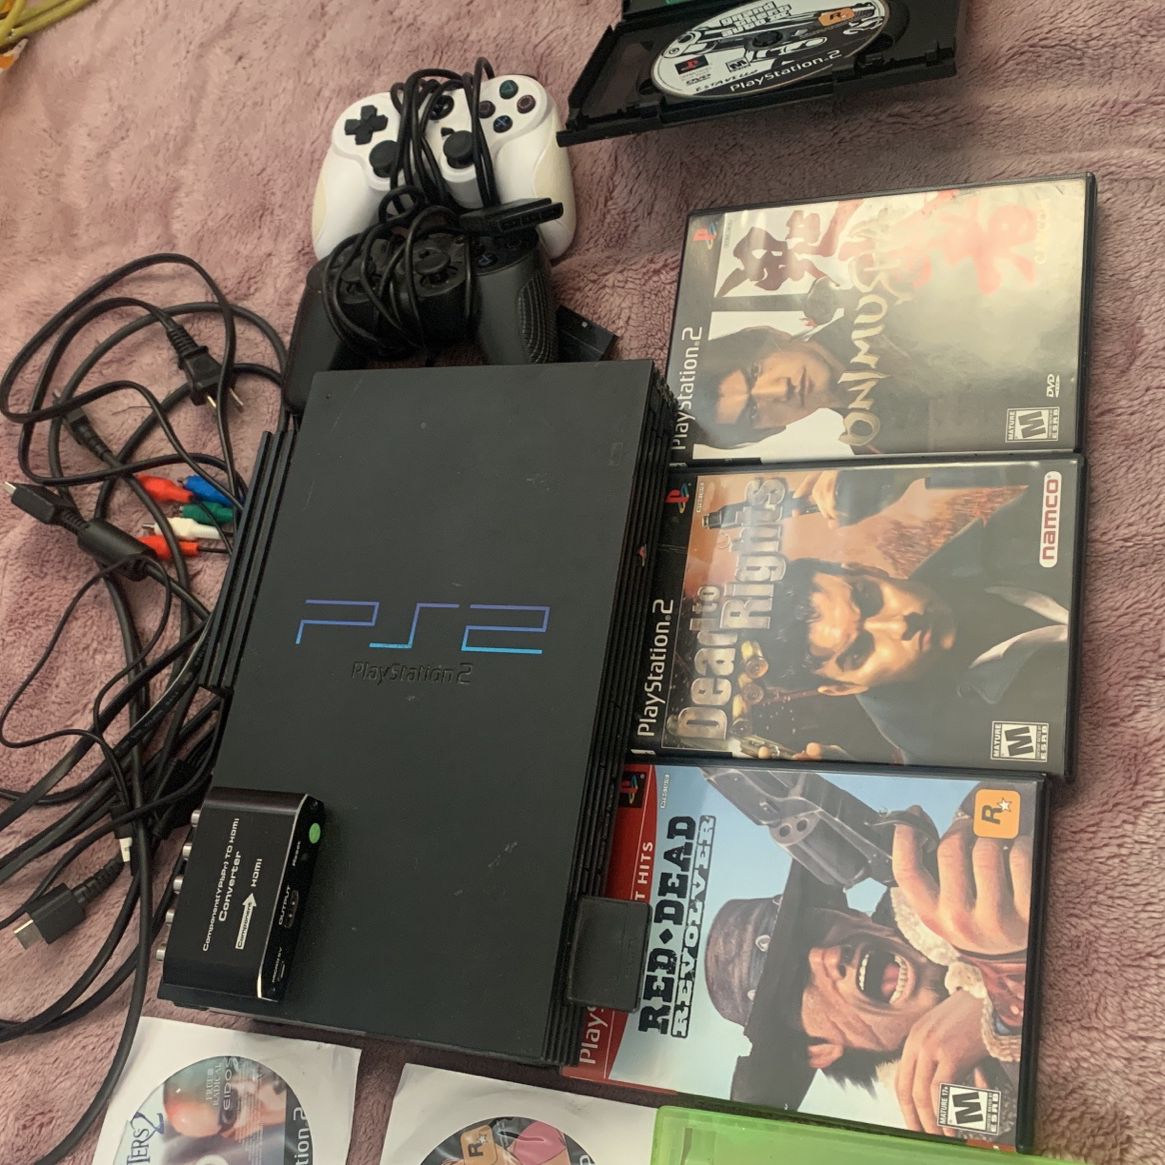 Ps2 For Sale With Games $130 Obo